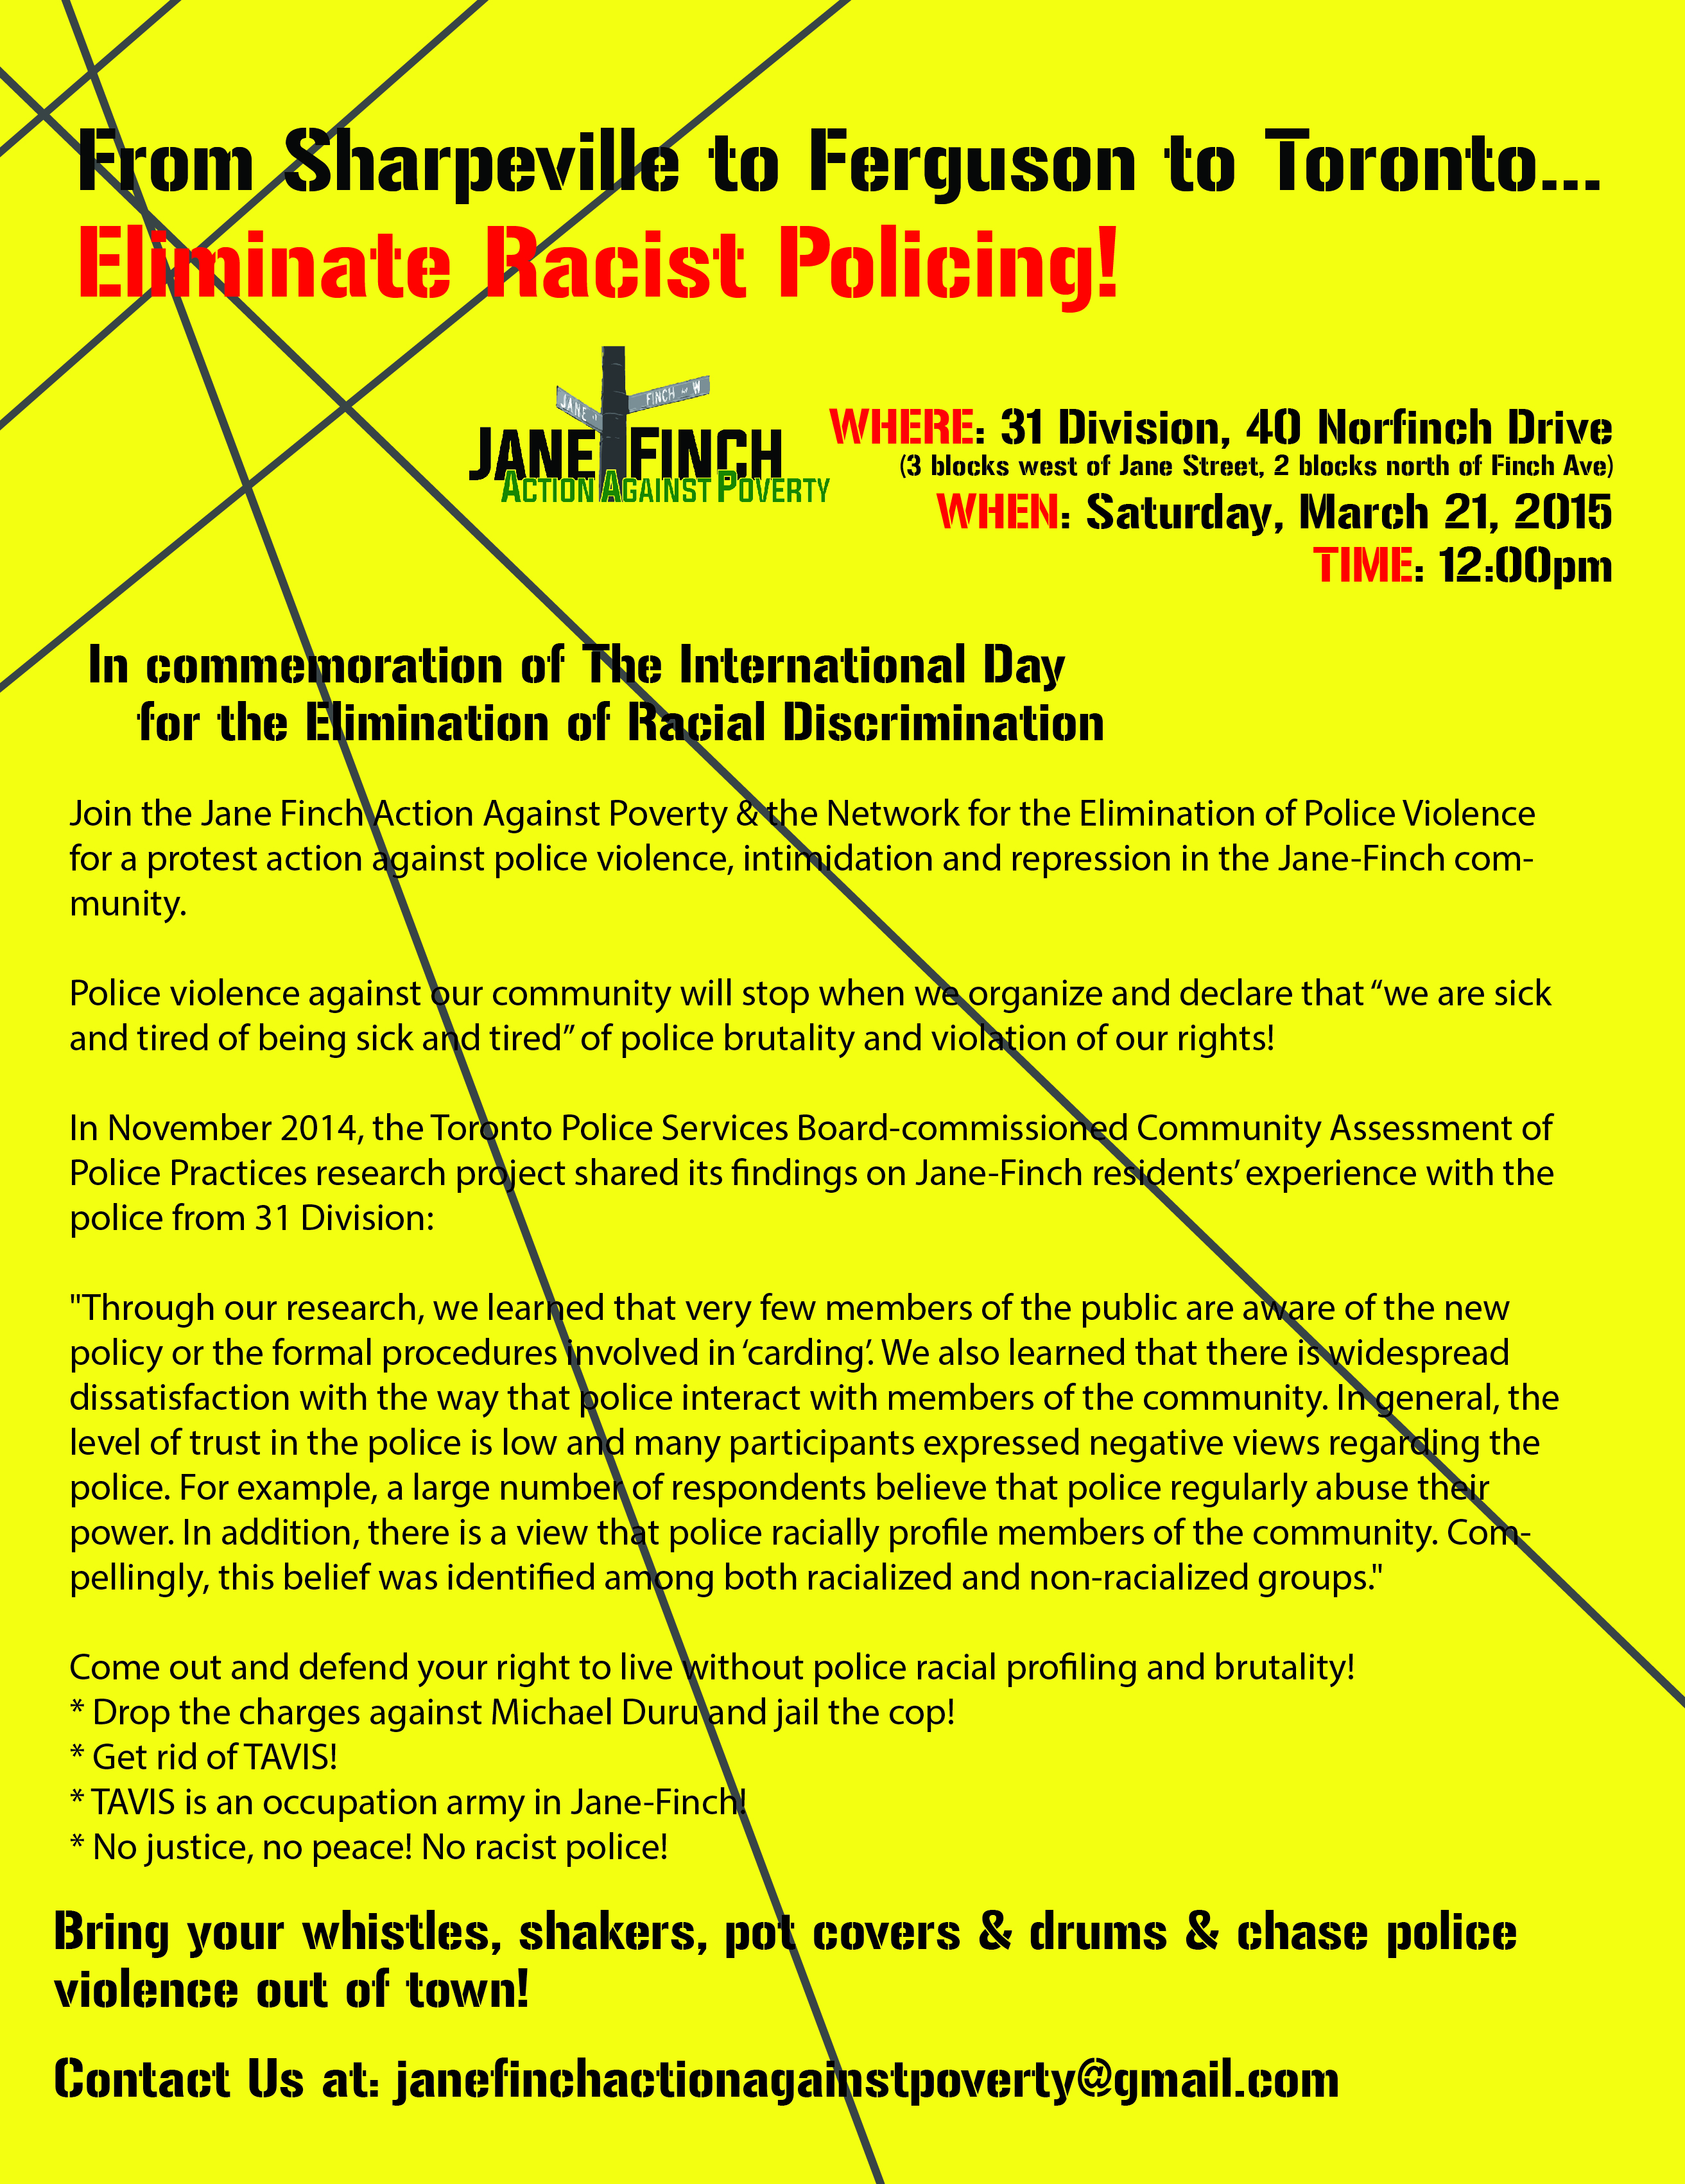 From Sharpeville to Ferguson to Toronto...Eliminate Racist Policing! Event Poster.